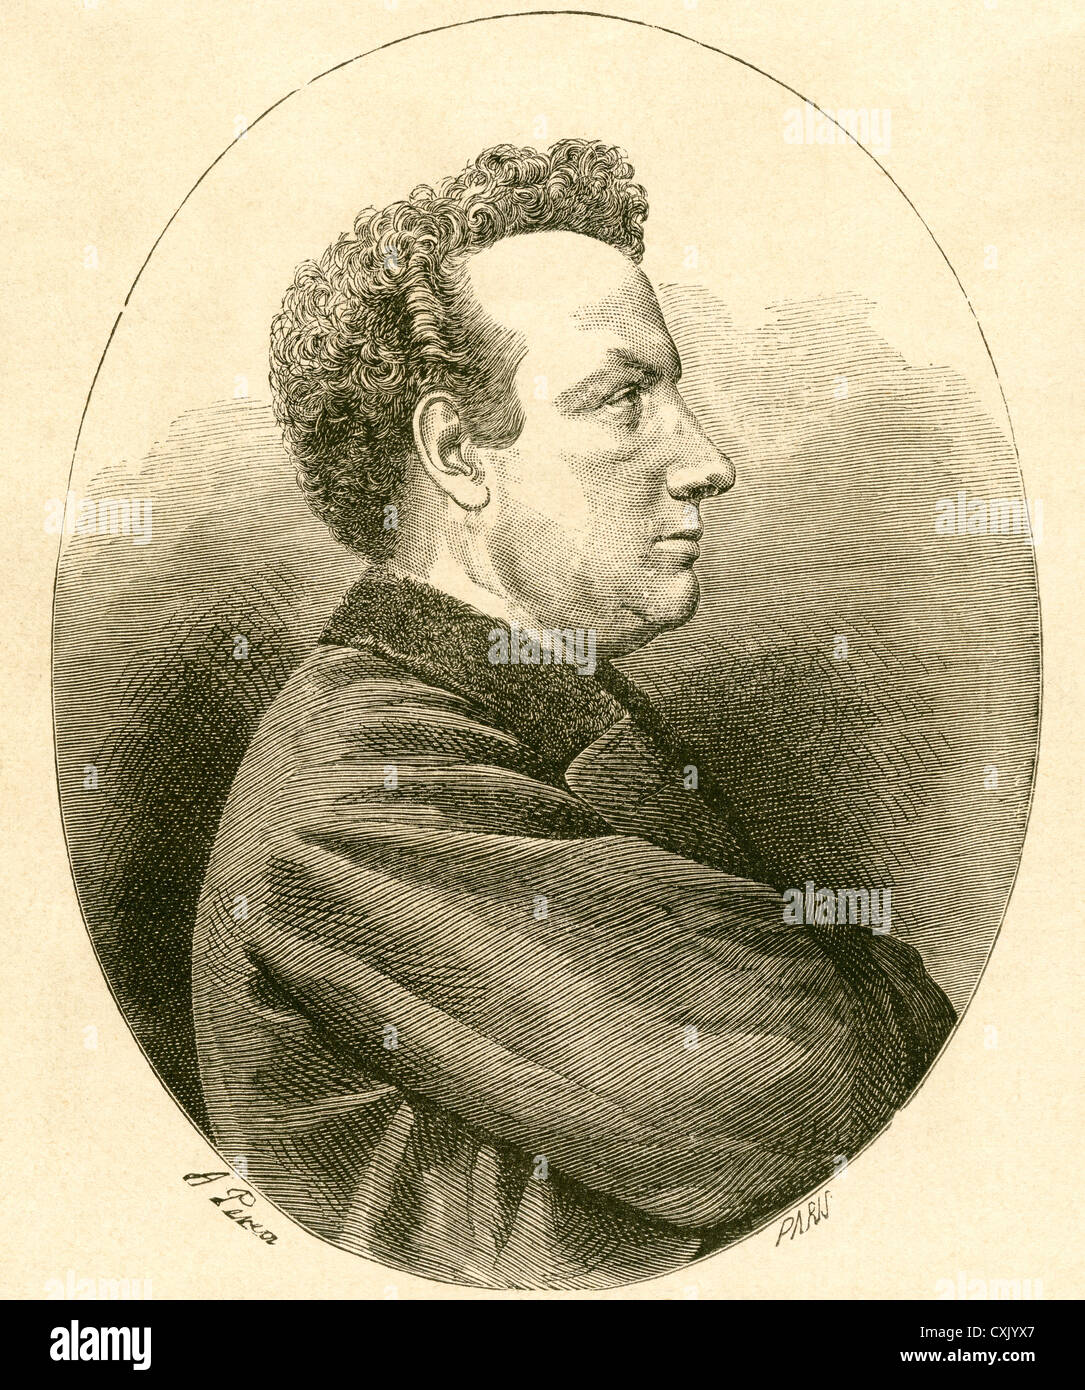 Jules Gabriel Verne, 1828 – 1905. French author. From El Museo Popular published Madrid, 1887. Stock Photo